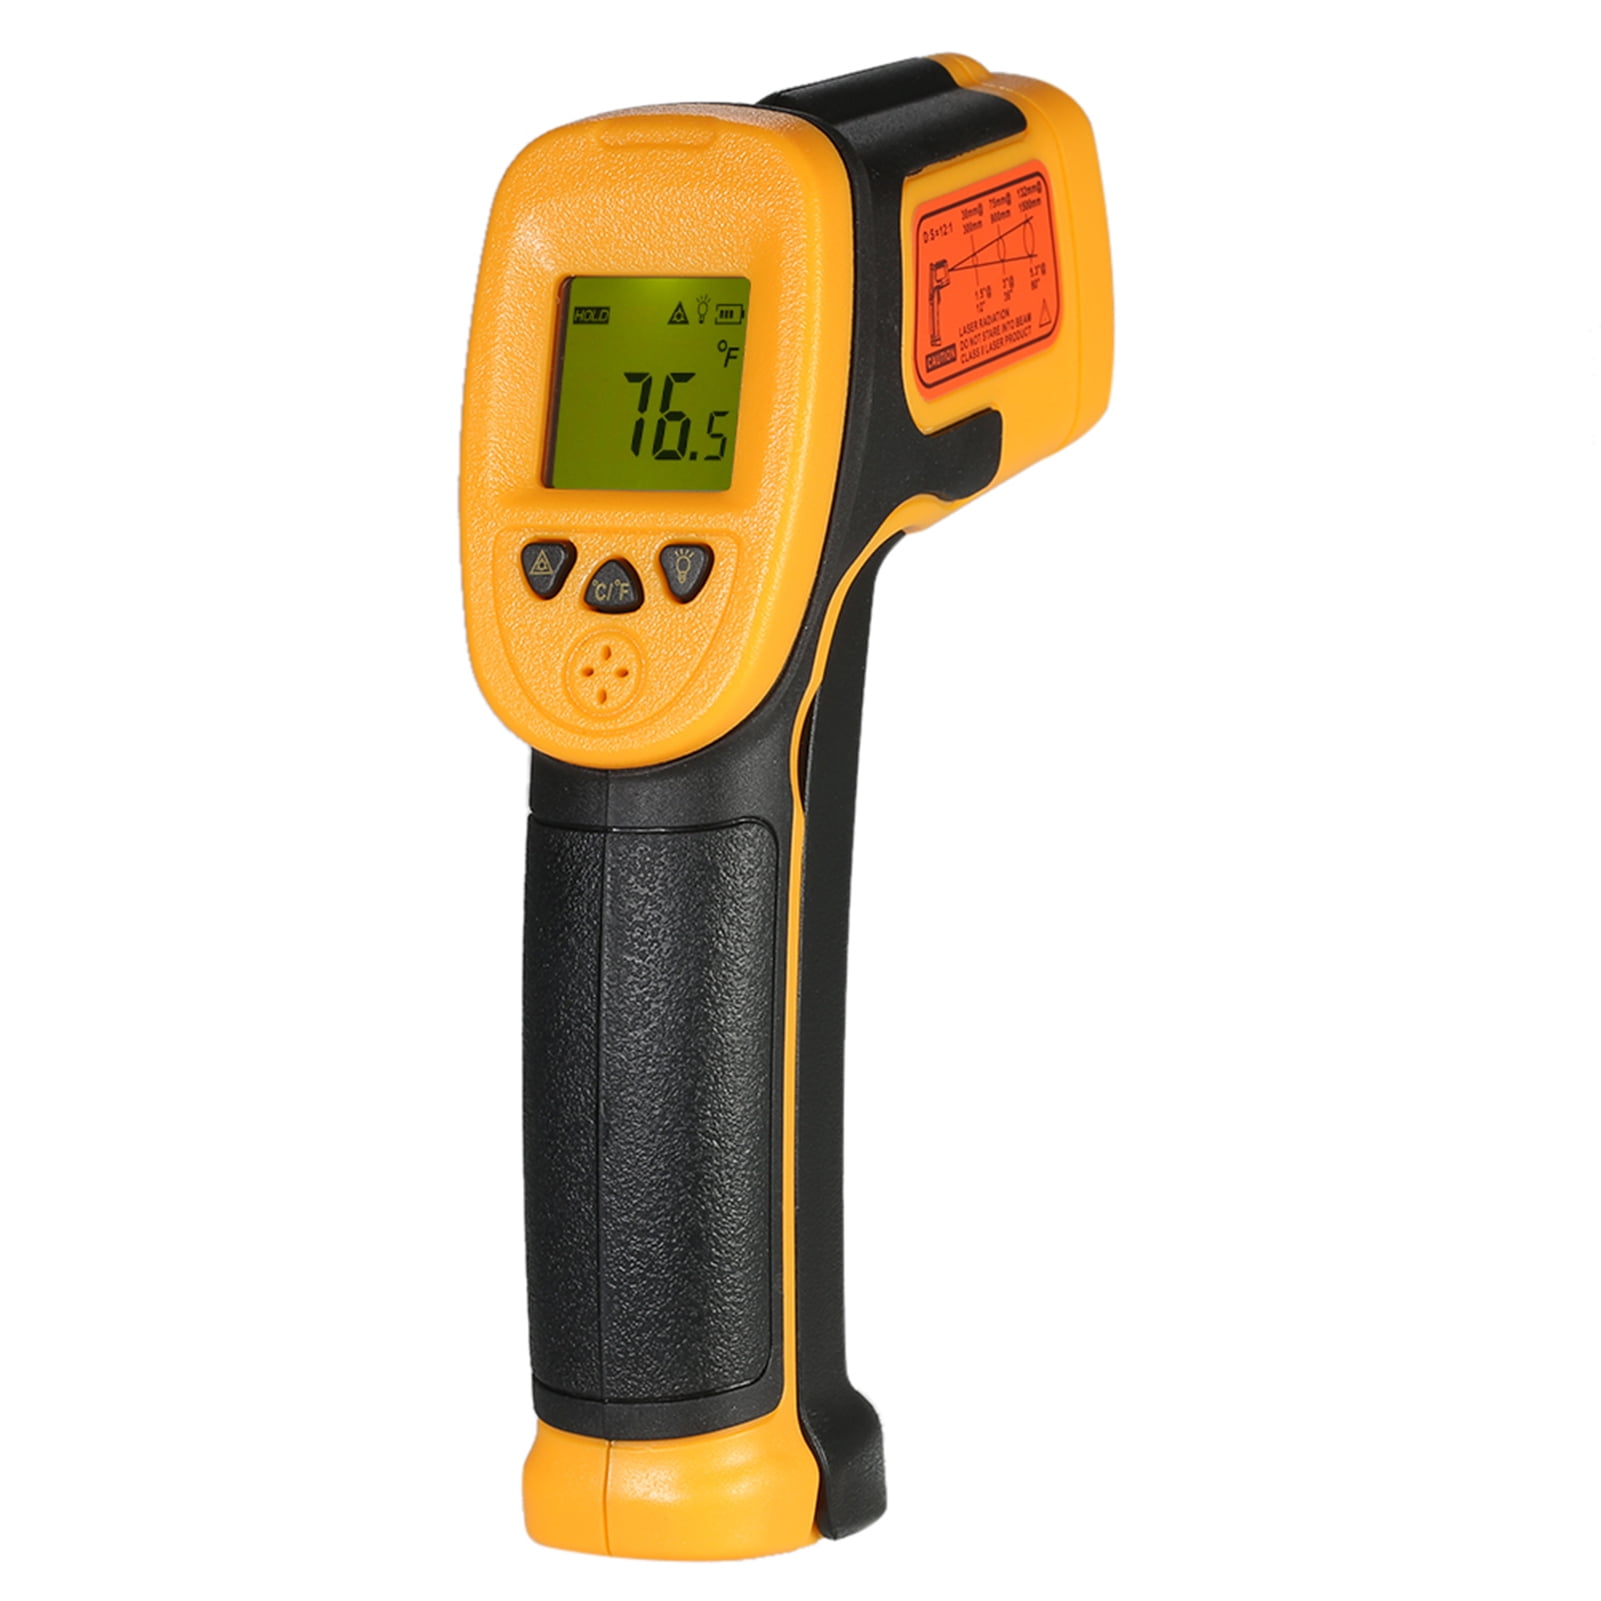 LCD Digital Infrared Thermometer Industrial Non-Contact Temperature Meter Sensor 